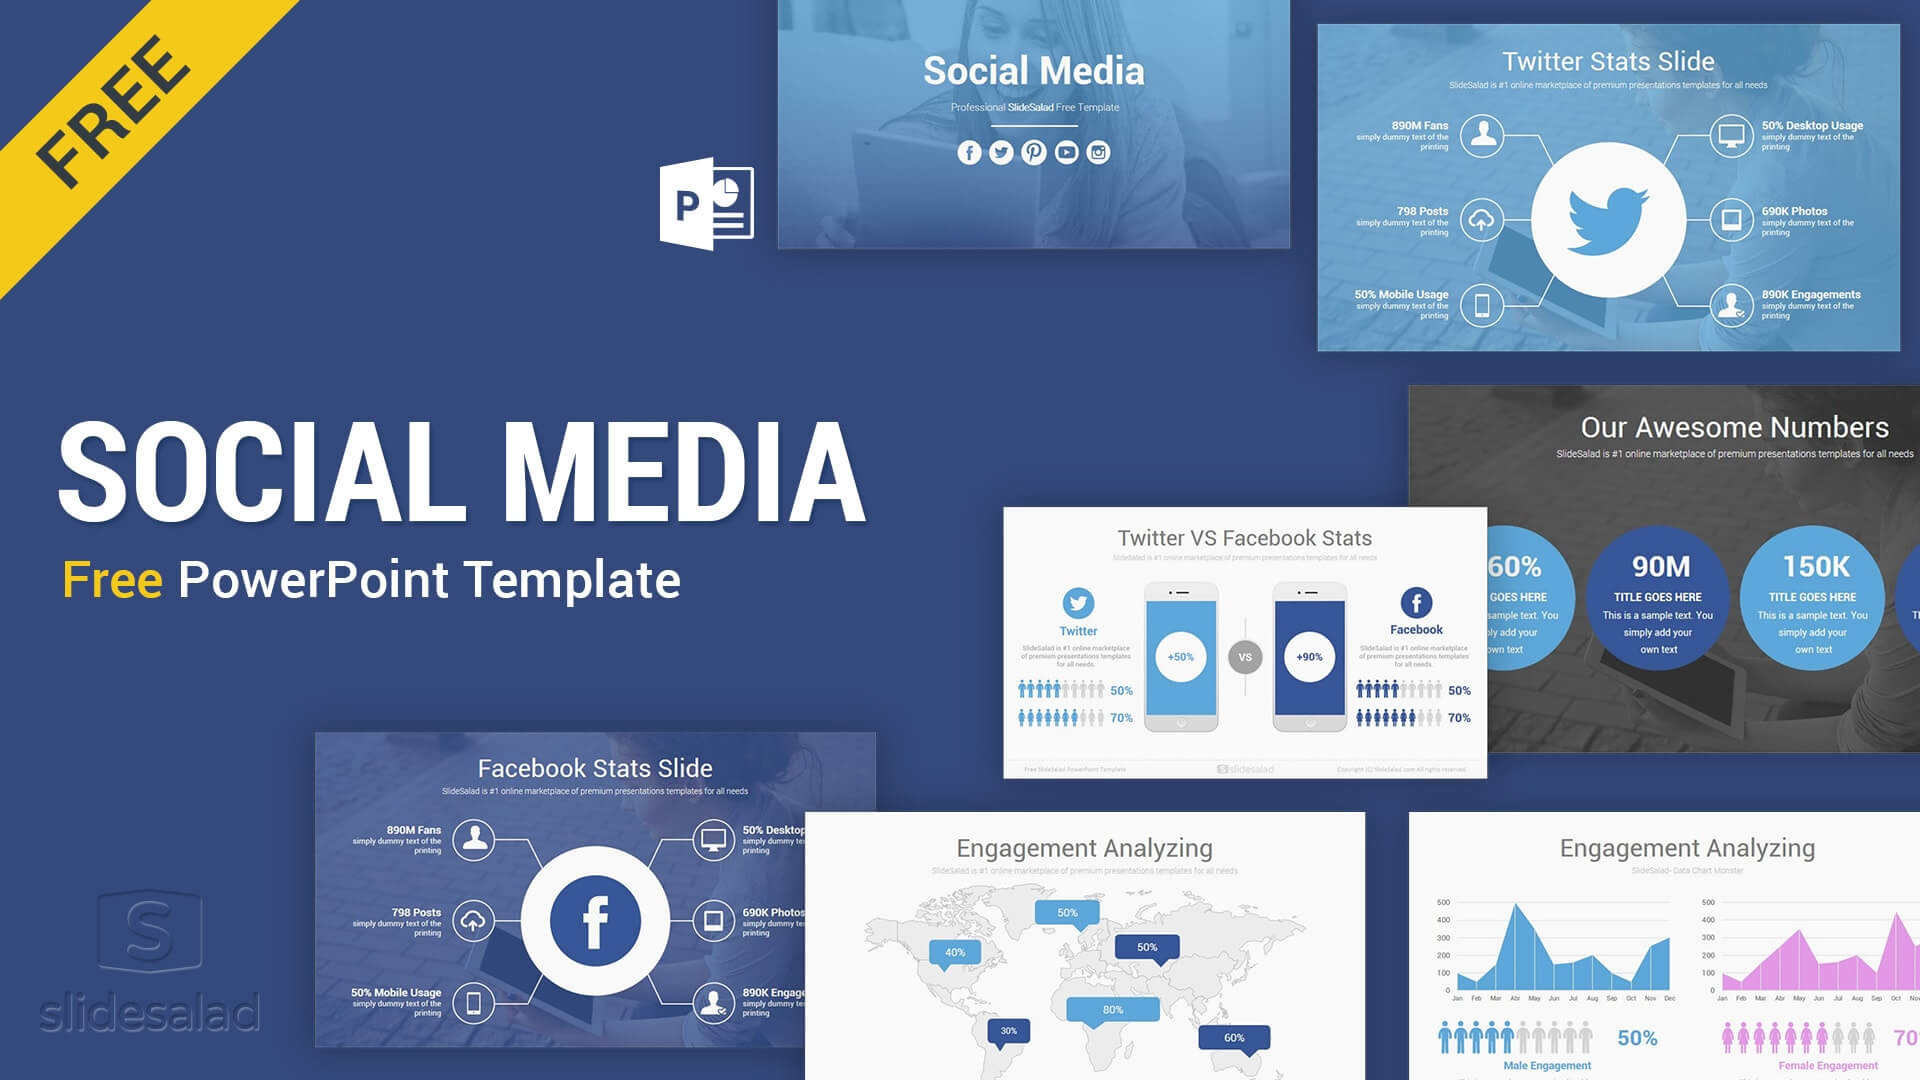 Social Media Free Powerpoint Template Ppt Slides – Slidesalad In Powerpoint Sample Templates Free Download